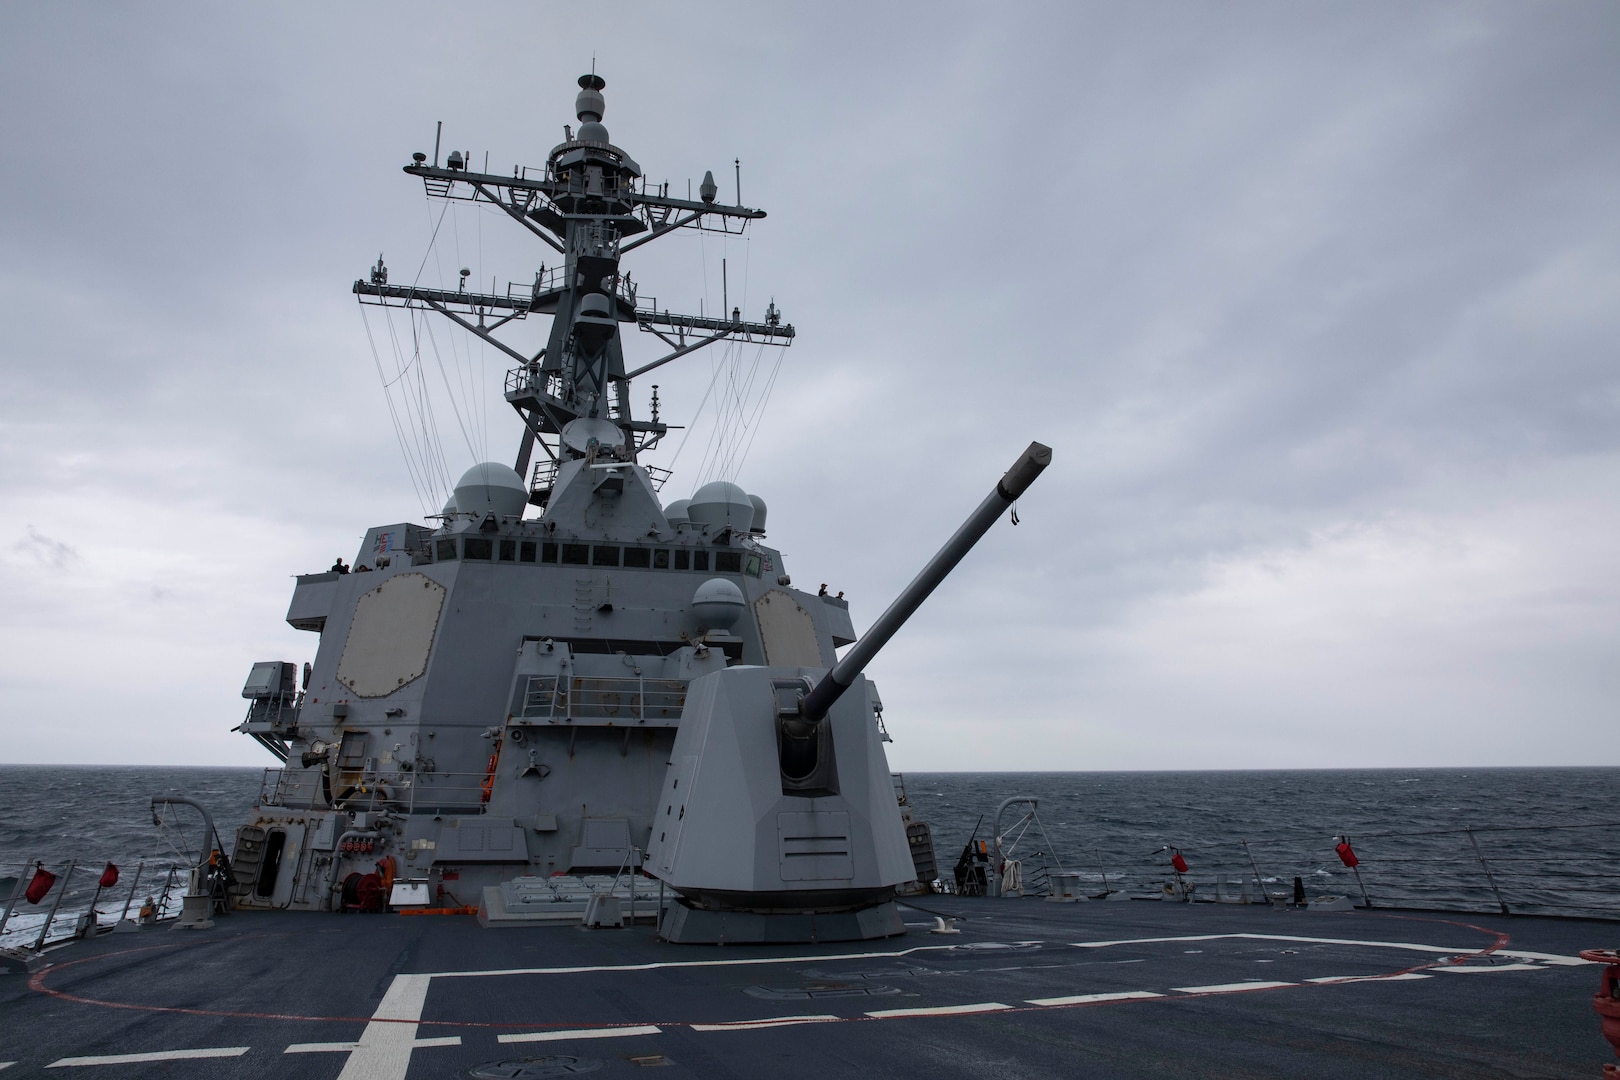 The Arleigh Burke-class guided-missile destroyer USS Ralph Johnson (DDG 114) conducts routine underway operations. Ralph Johnson is forward-deployed to the U.S. 7th Fleet area of operations in support of a free and open Indo-Pacific.